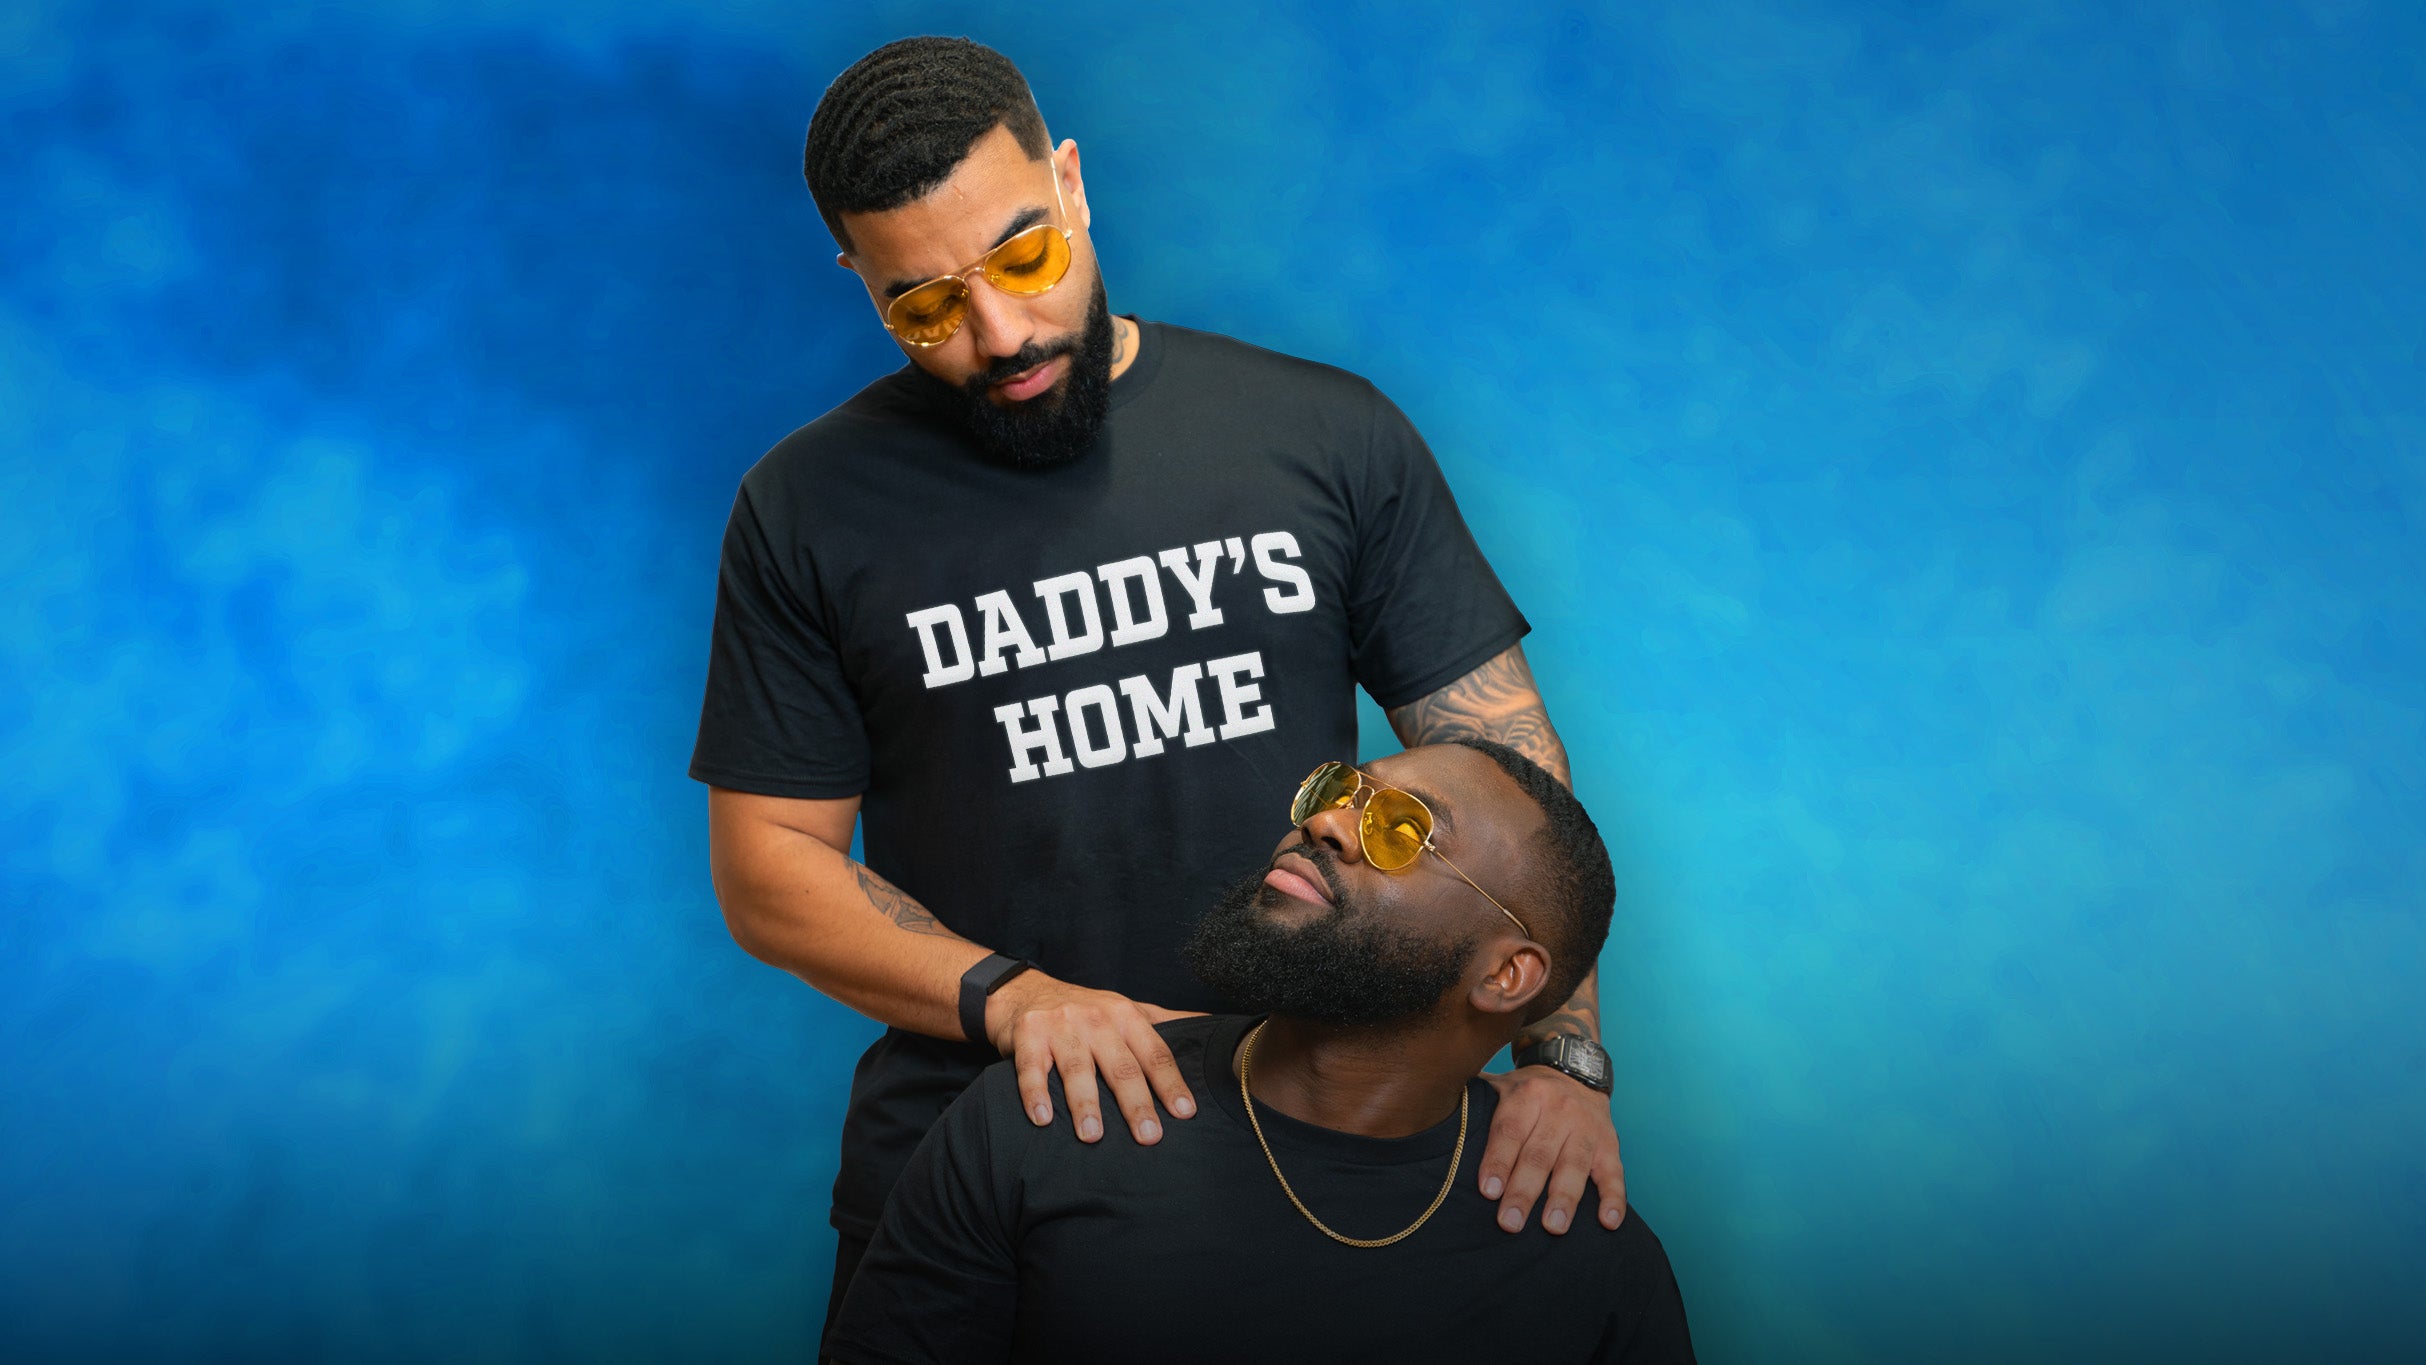 new presale code for ShxtsNGigs: Daddy's Home Tour advanced tickets in Philadelphia at The Fillmore Philadelphia